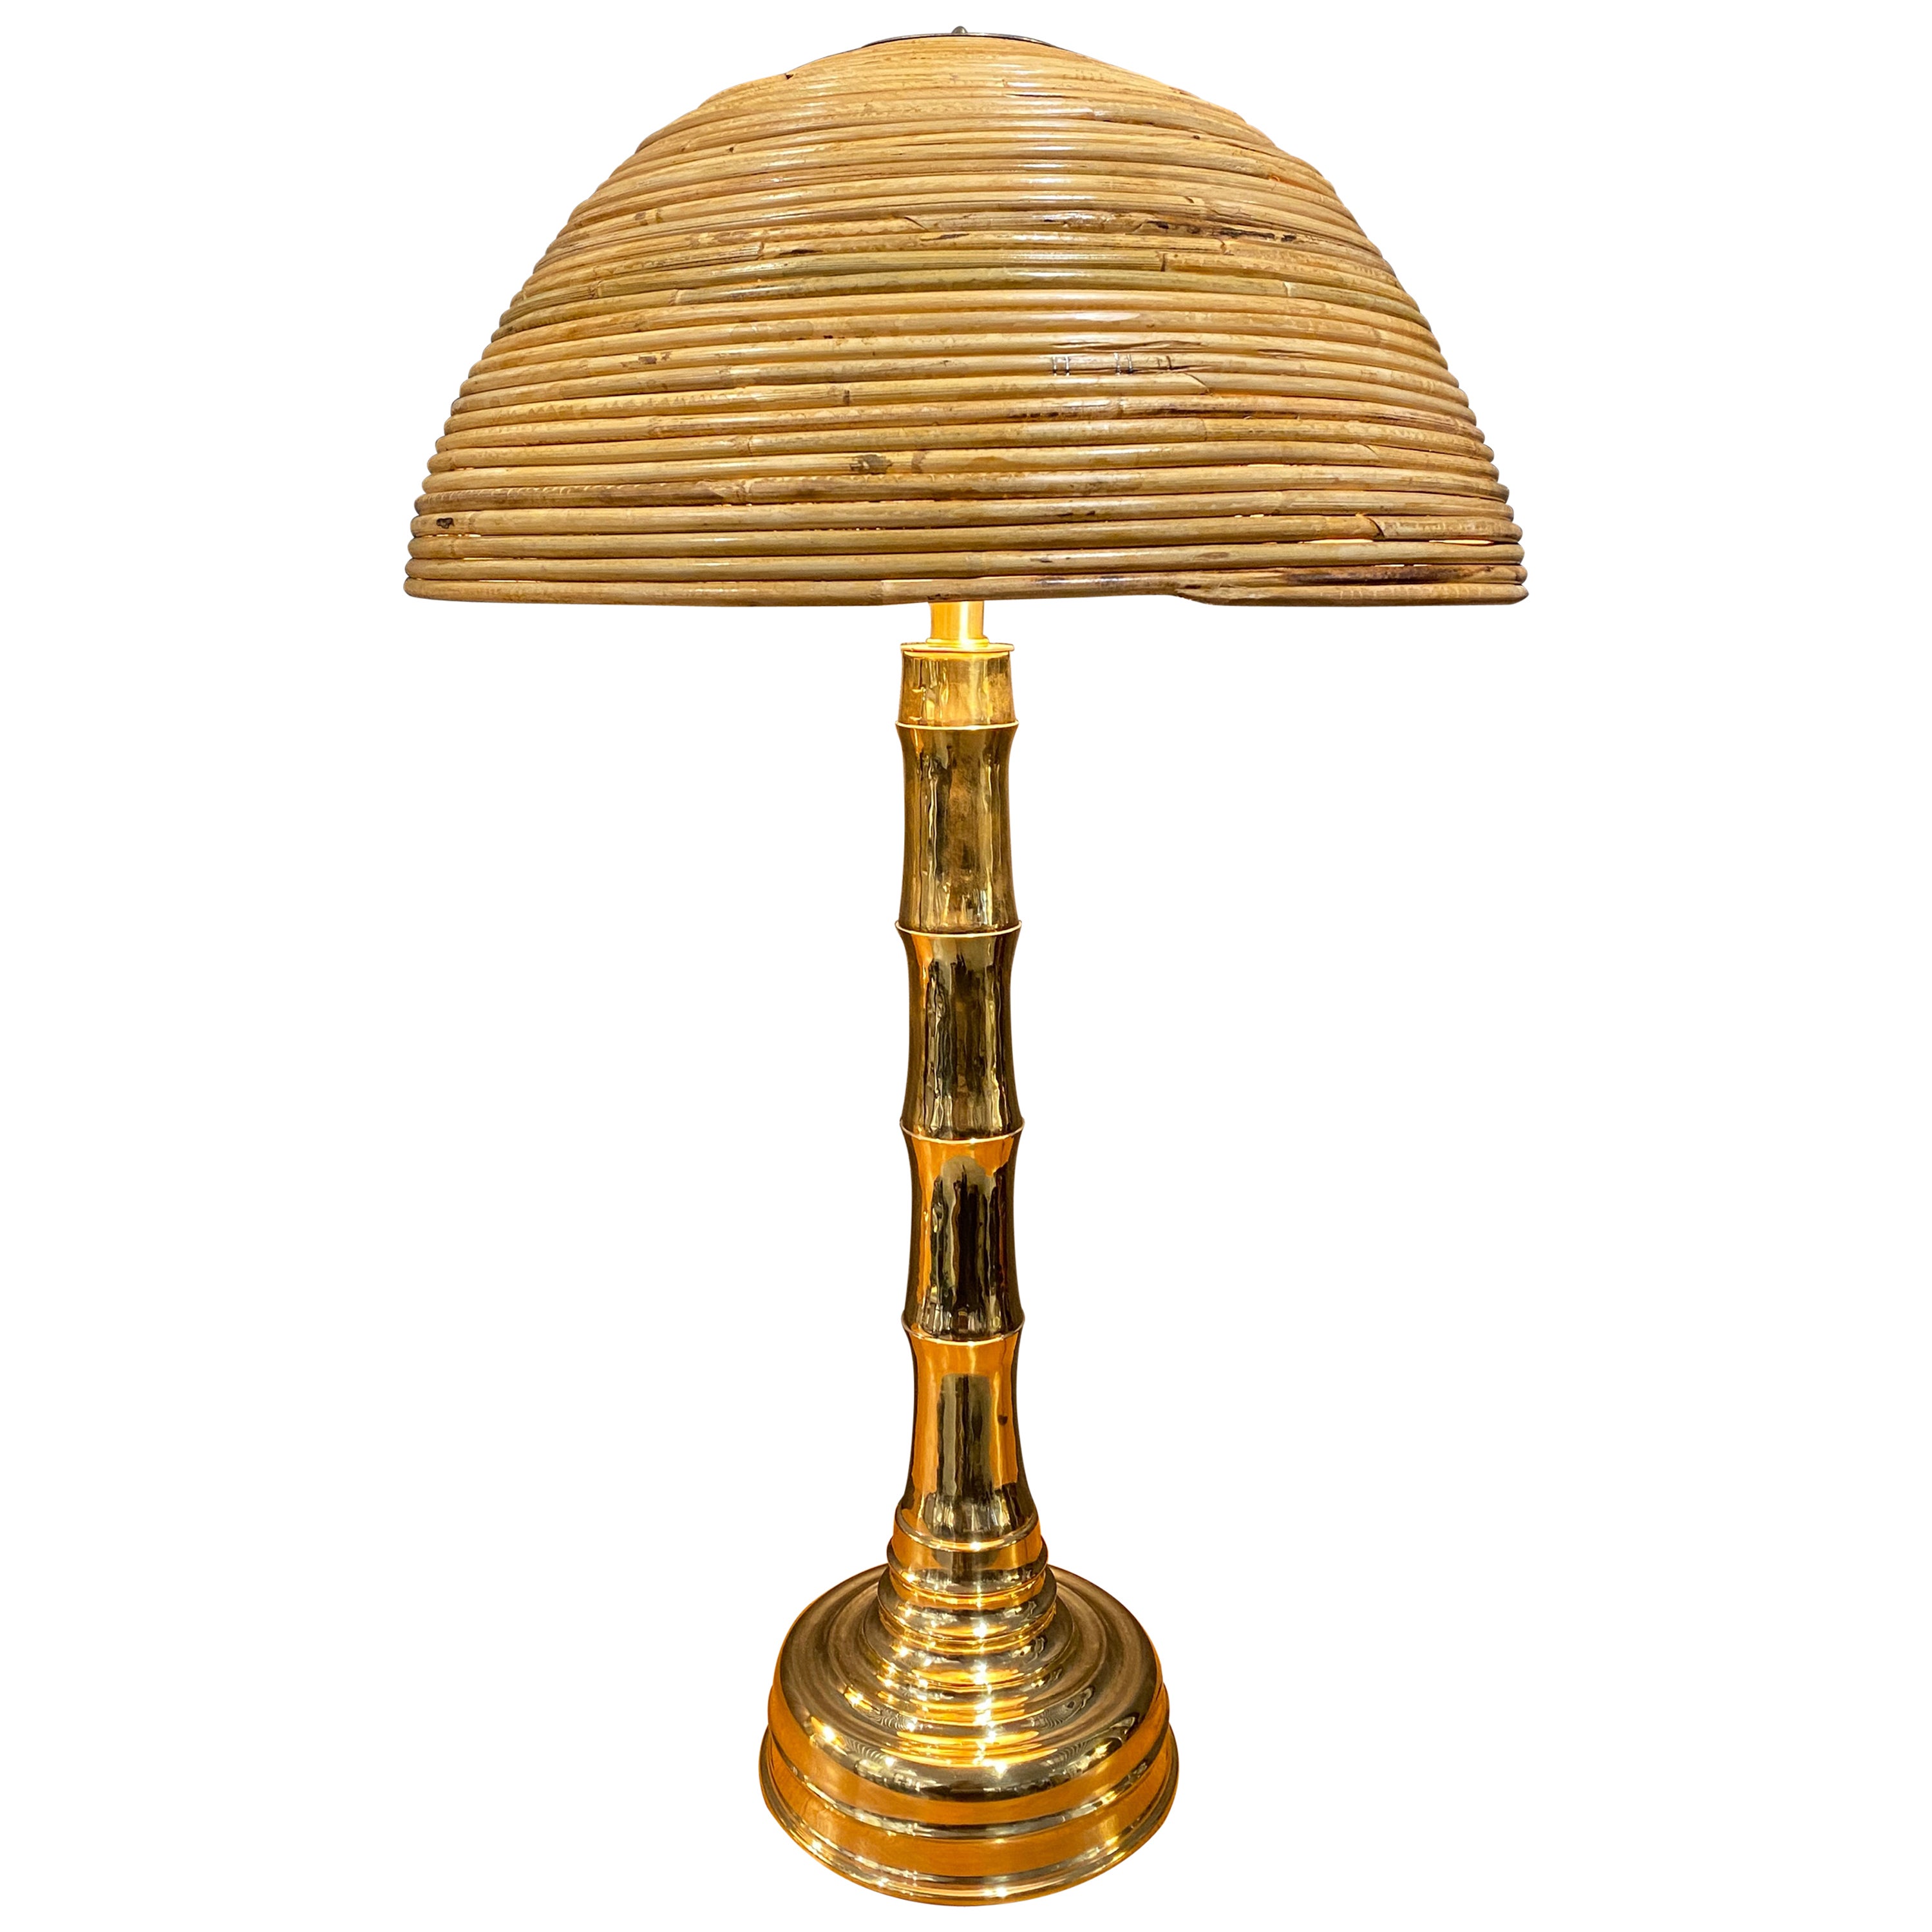 Italian Contemporary Gabriella Crespi Style Brass Lamp with Bamboo Lampshade For Sale